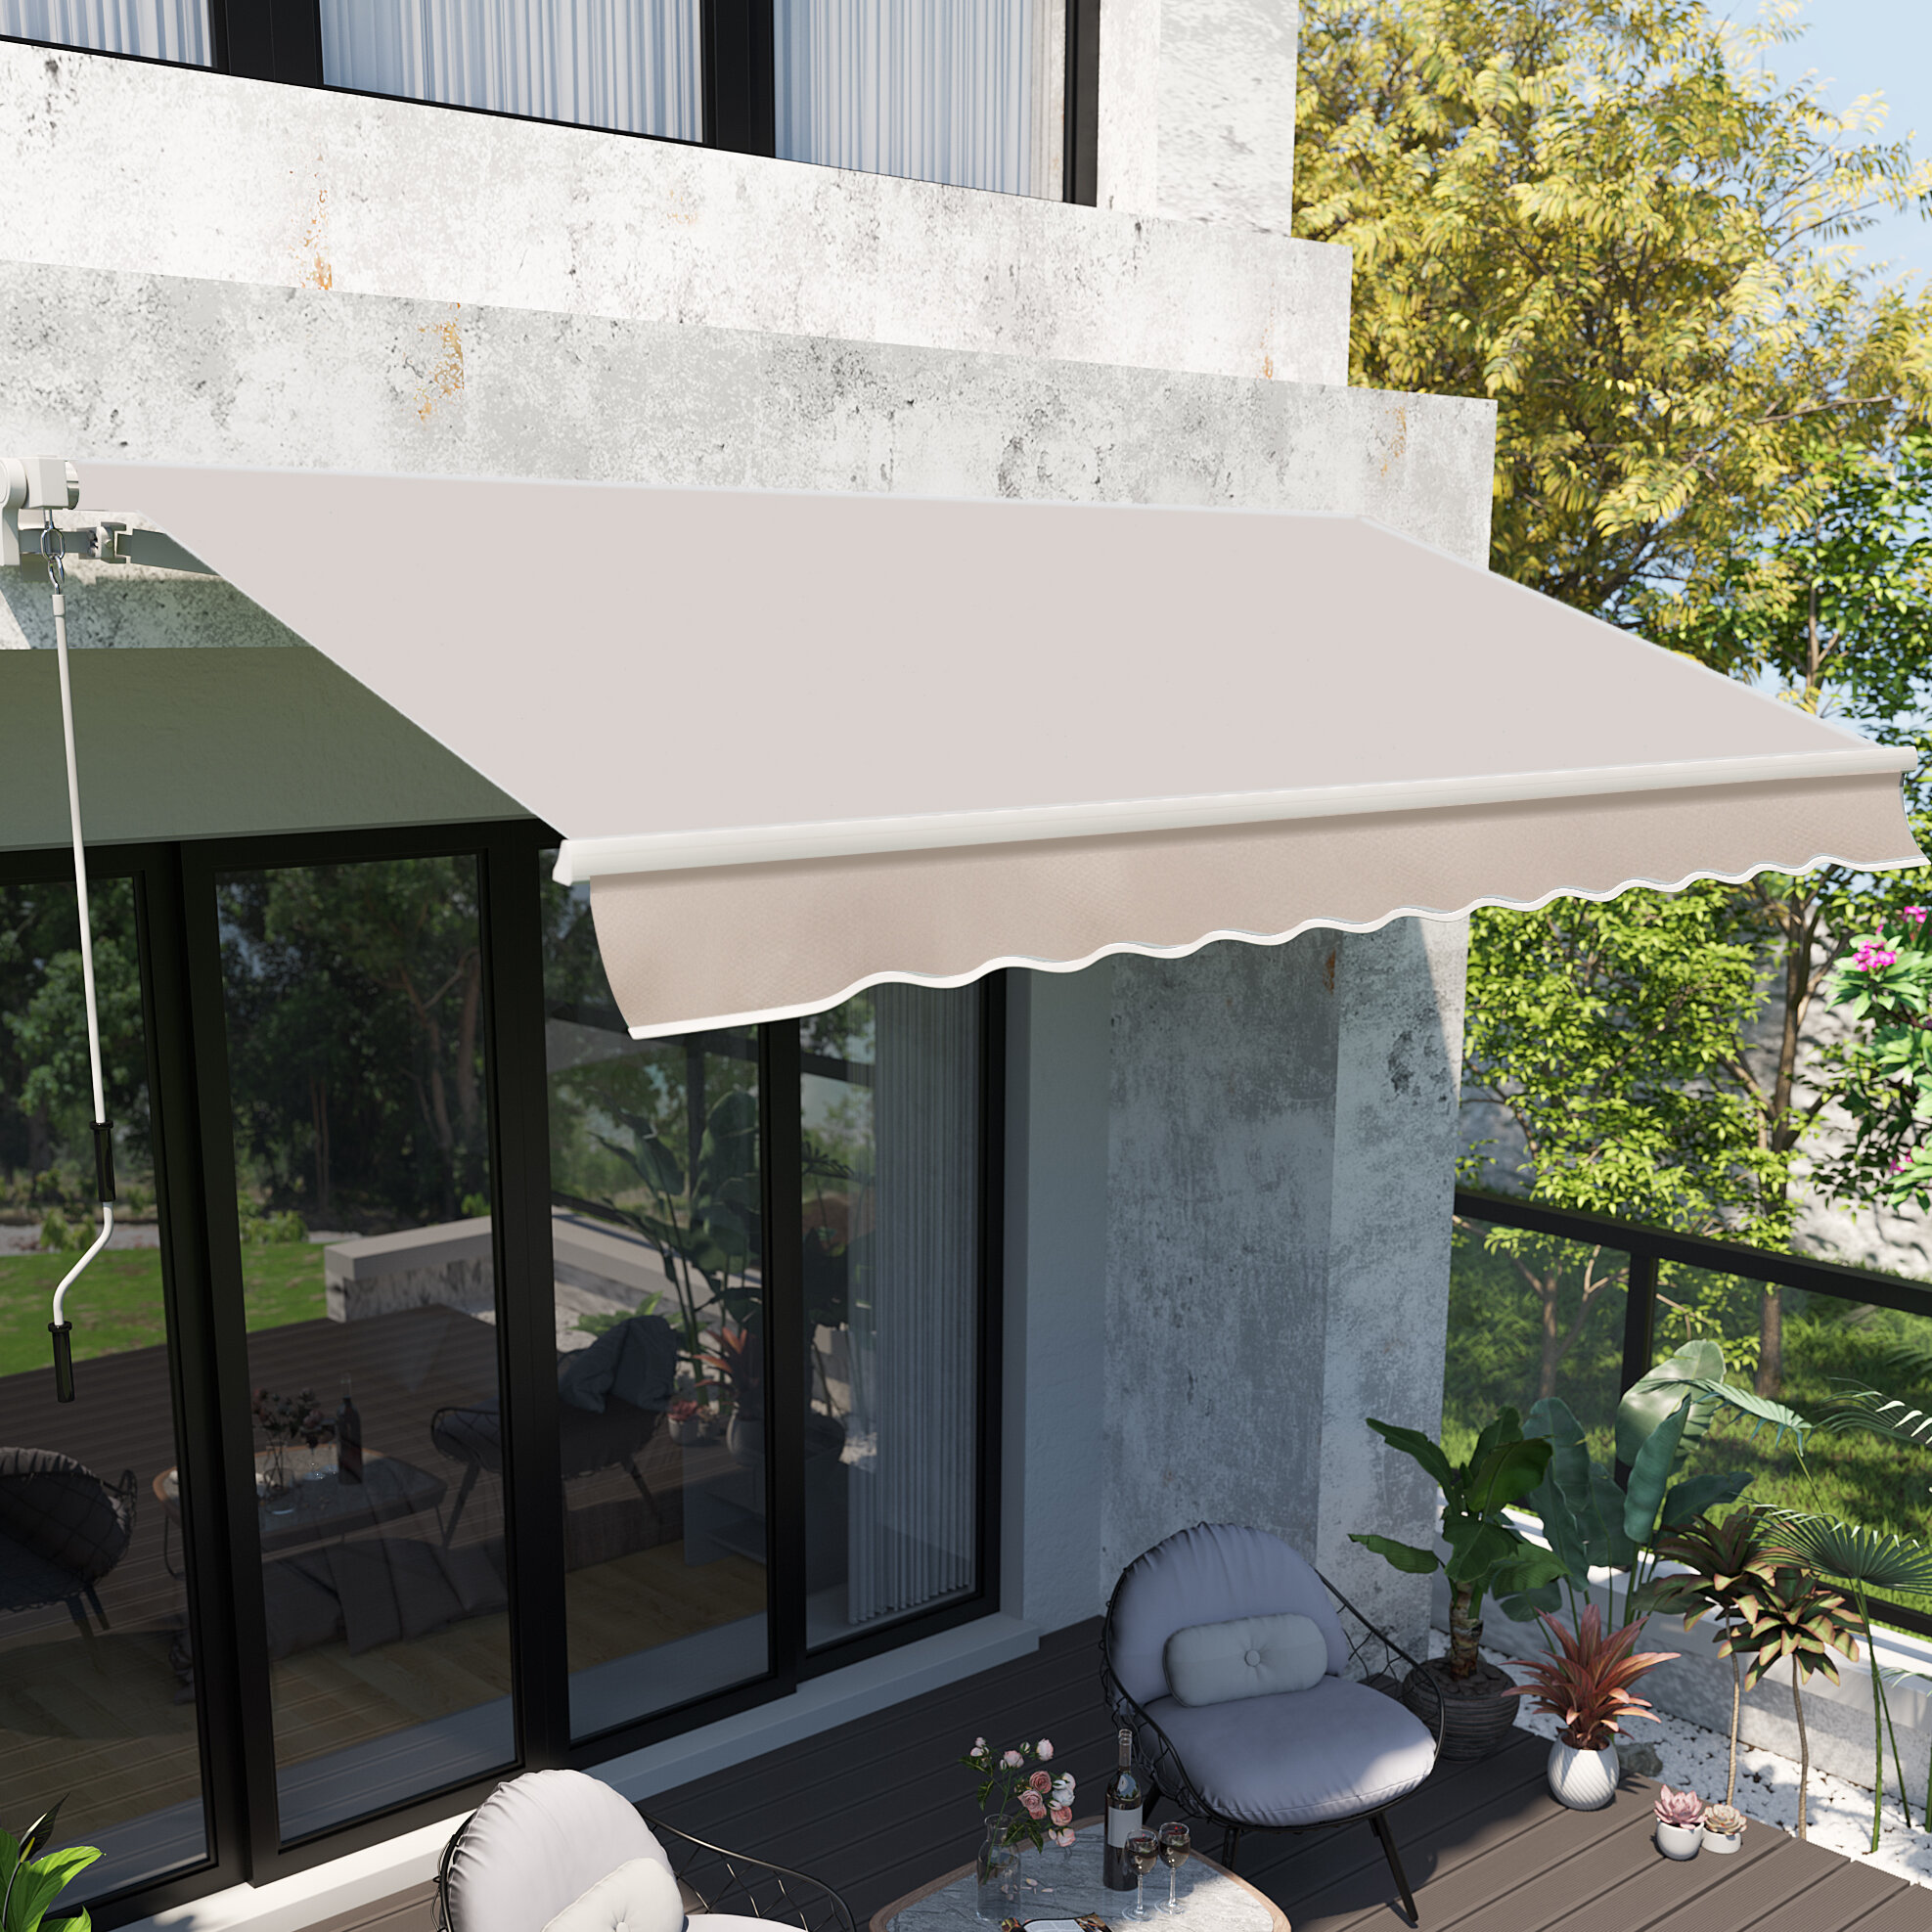 LARS360 Side Awning Retractable Extendable Polyester Awning Blind Patio Sunshade Outdoor Privacy Screen for Balcony Terrace and Garden 200cm x 600cm, Grey